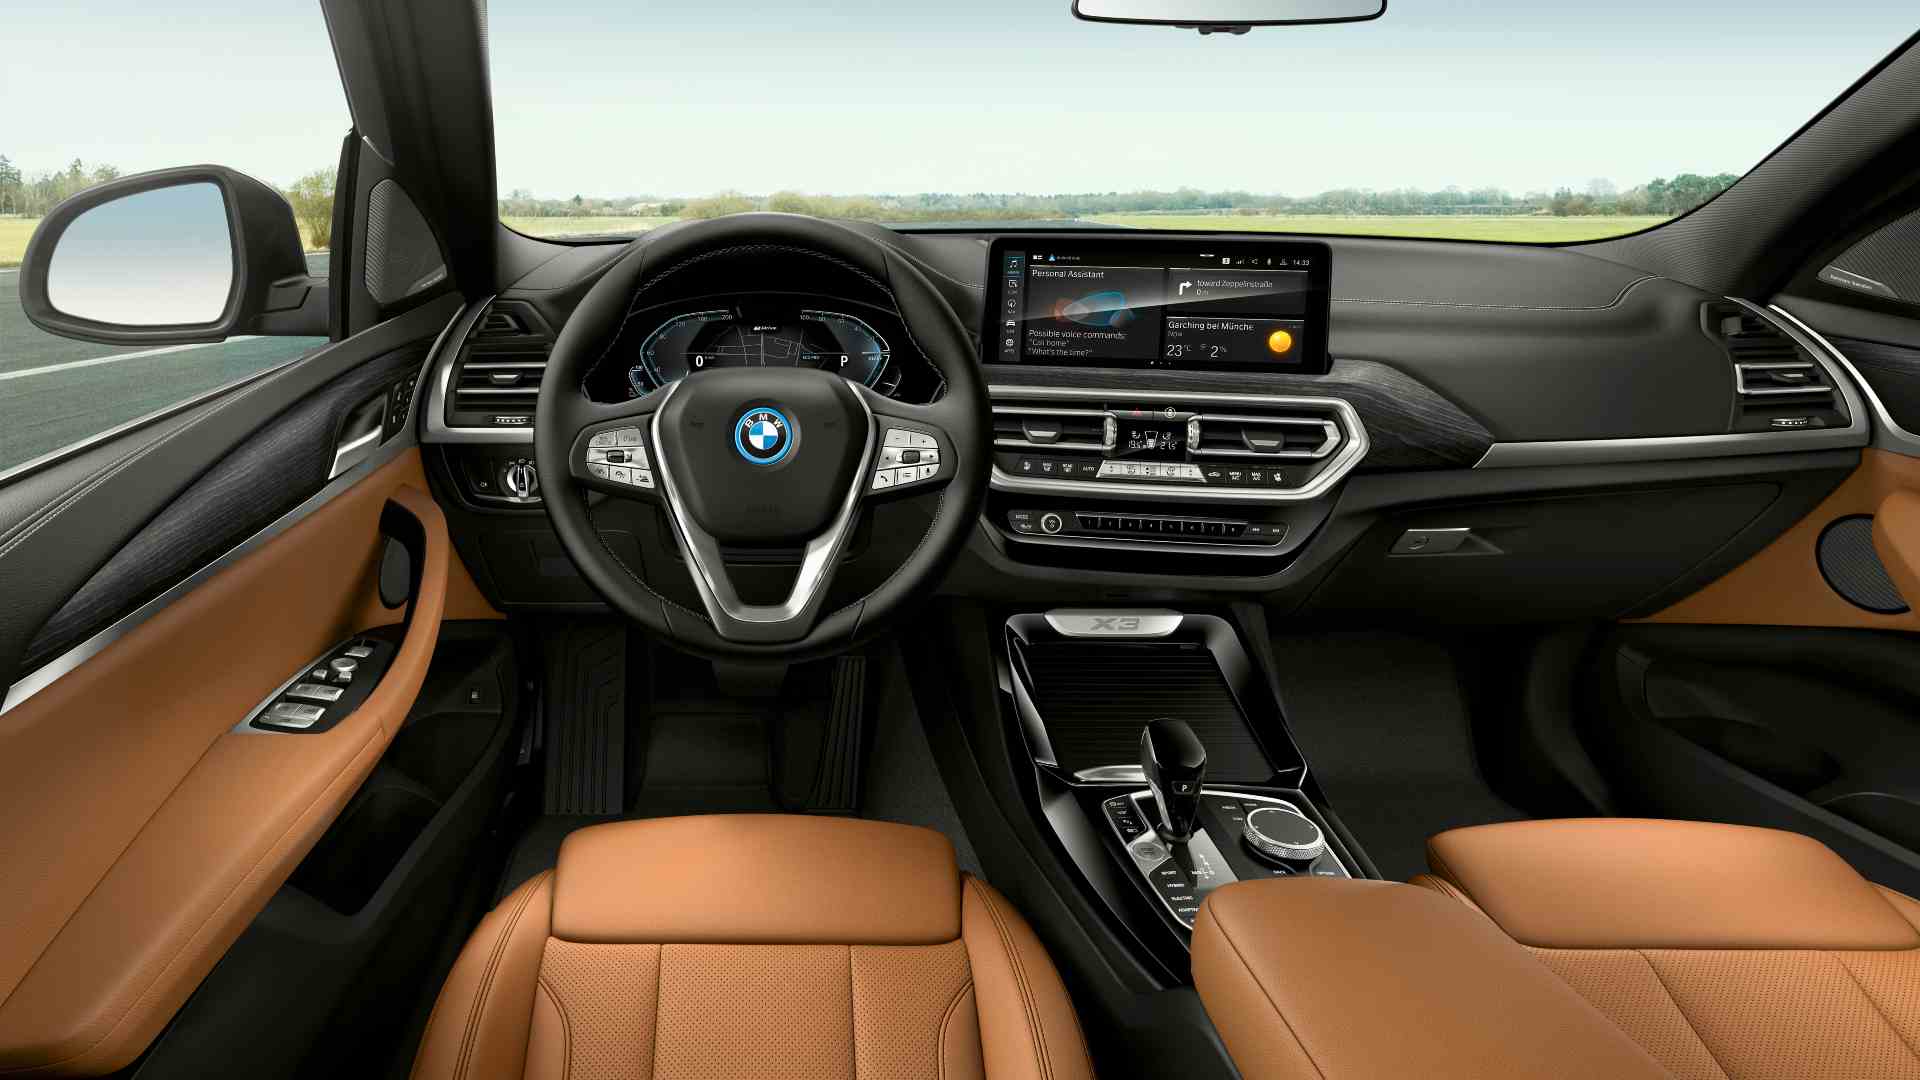 On the inside, the BMW X3 and X4 now get three-zone climate control and a 10.25-inch infotainment screen as standard. Image: BMW